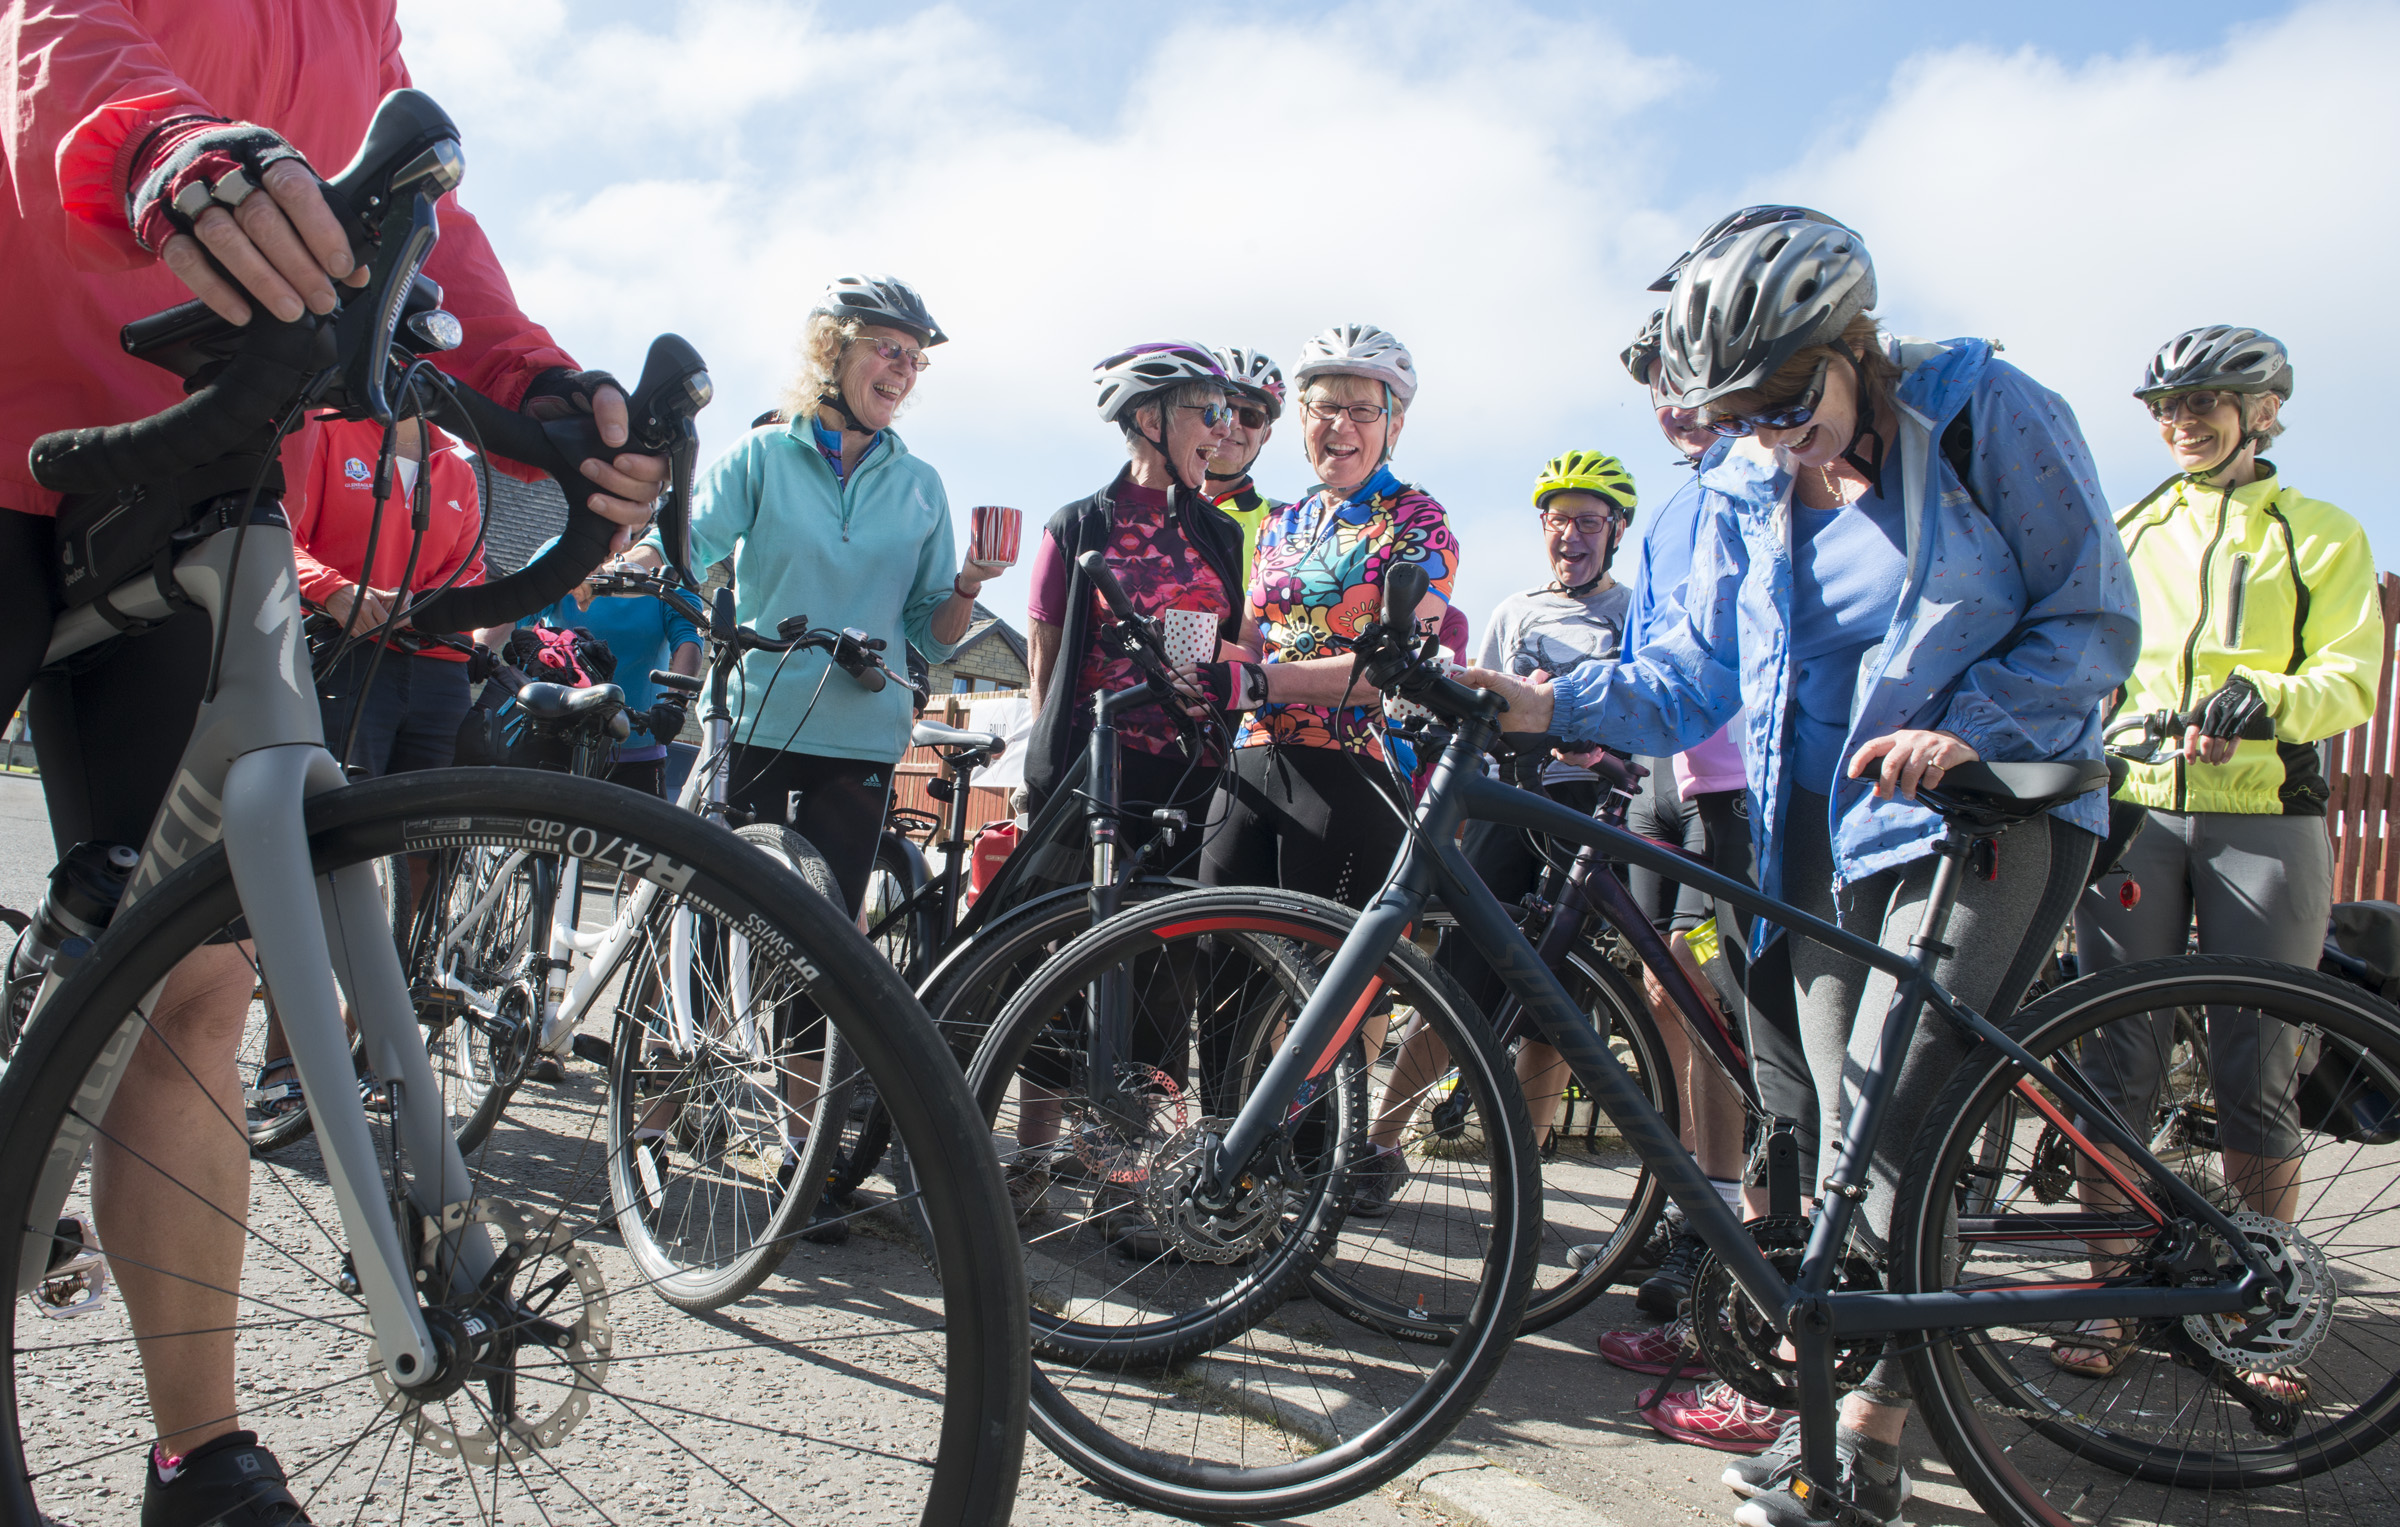 Cyclists ready to go at the Angus Cycling Festival in June 2019.